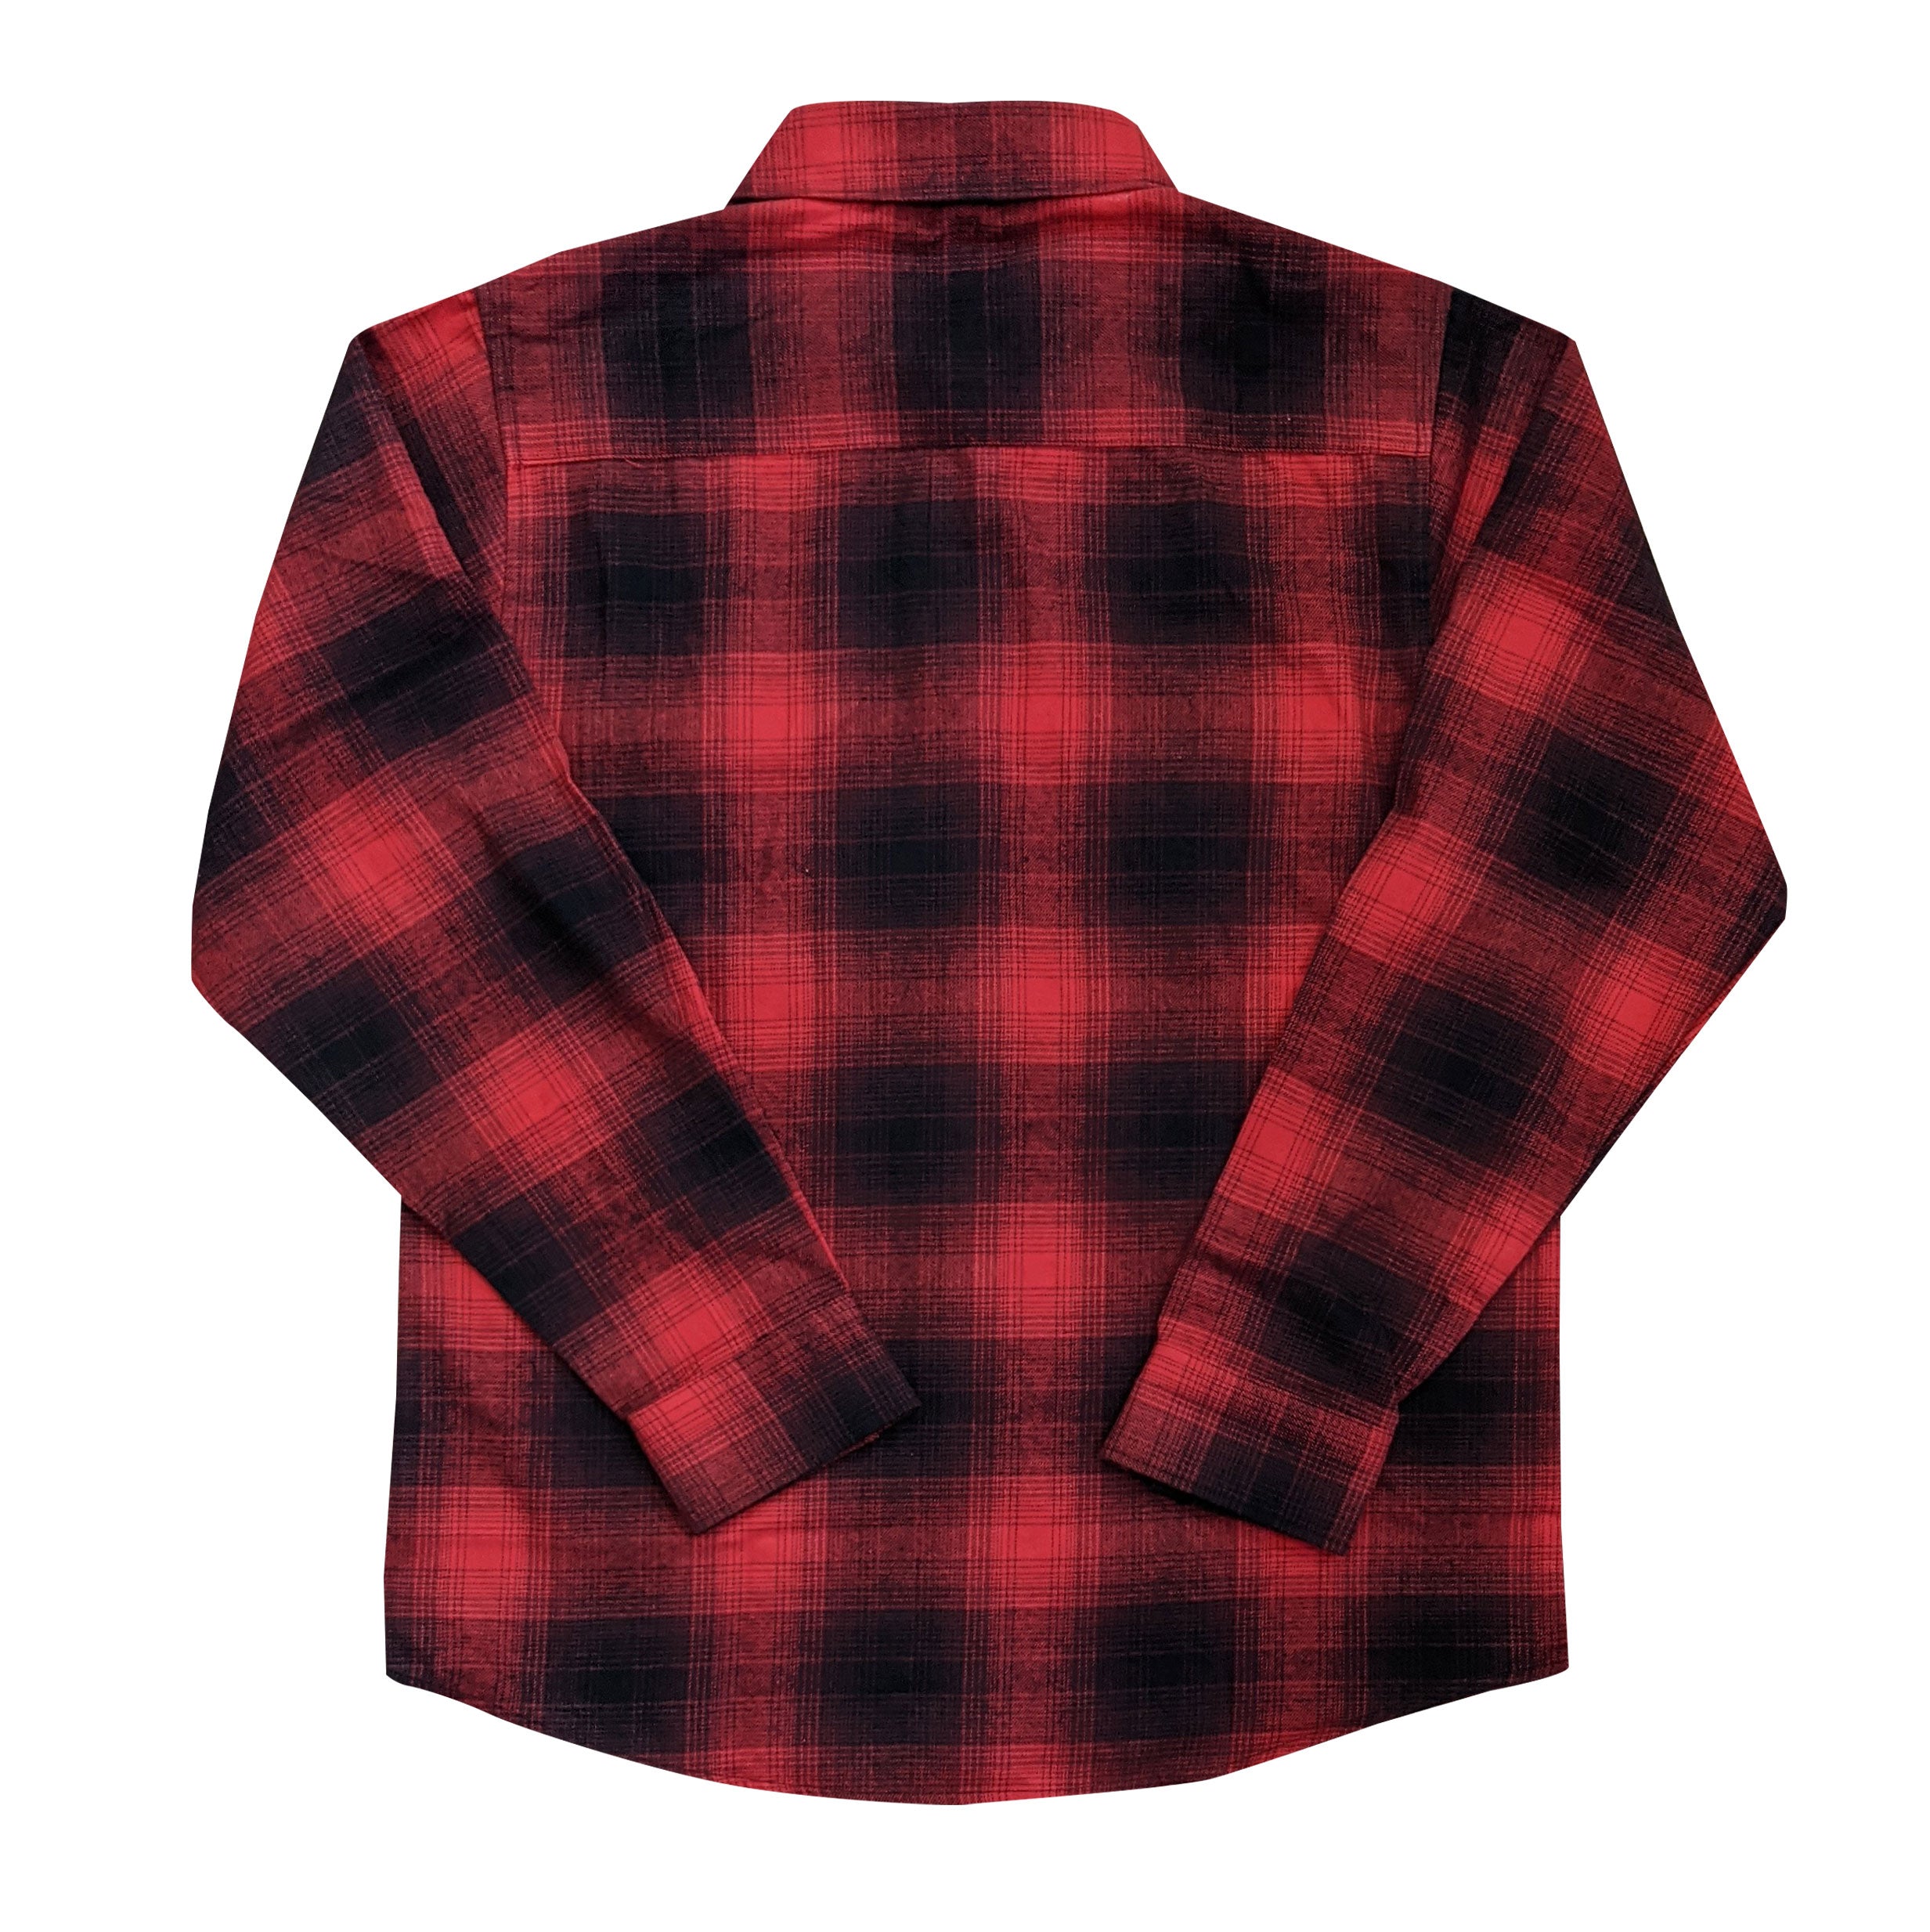 The Red Black Flannel